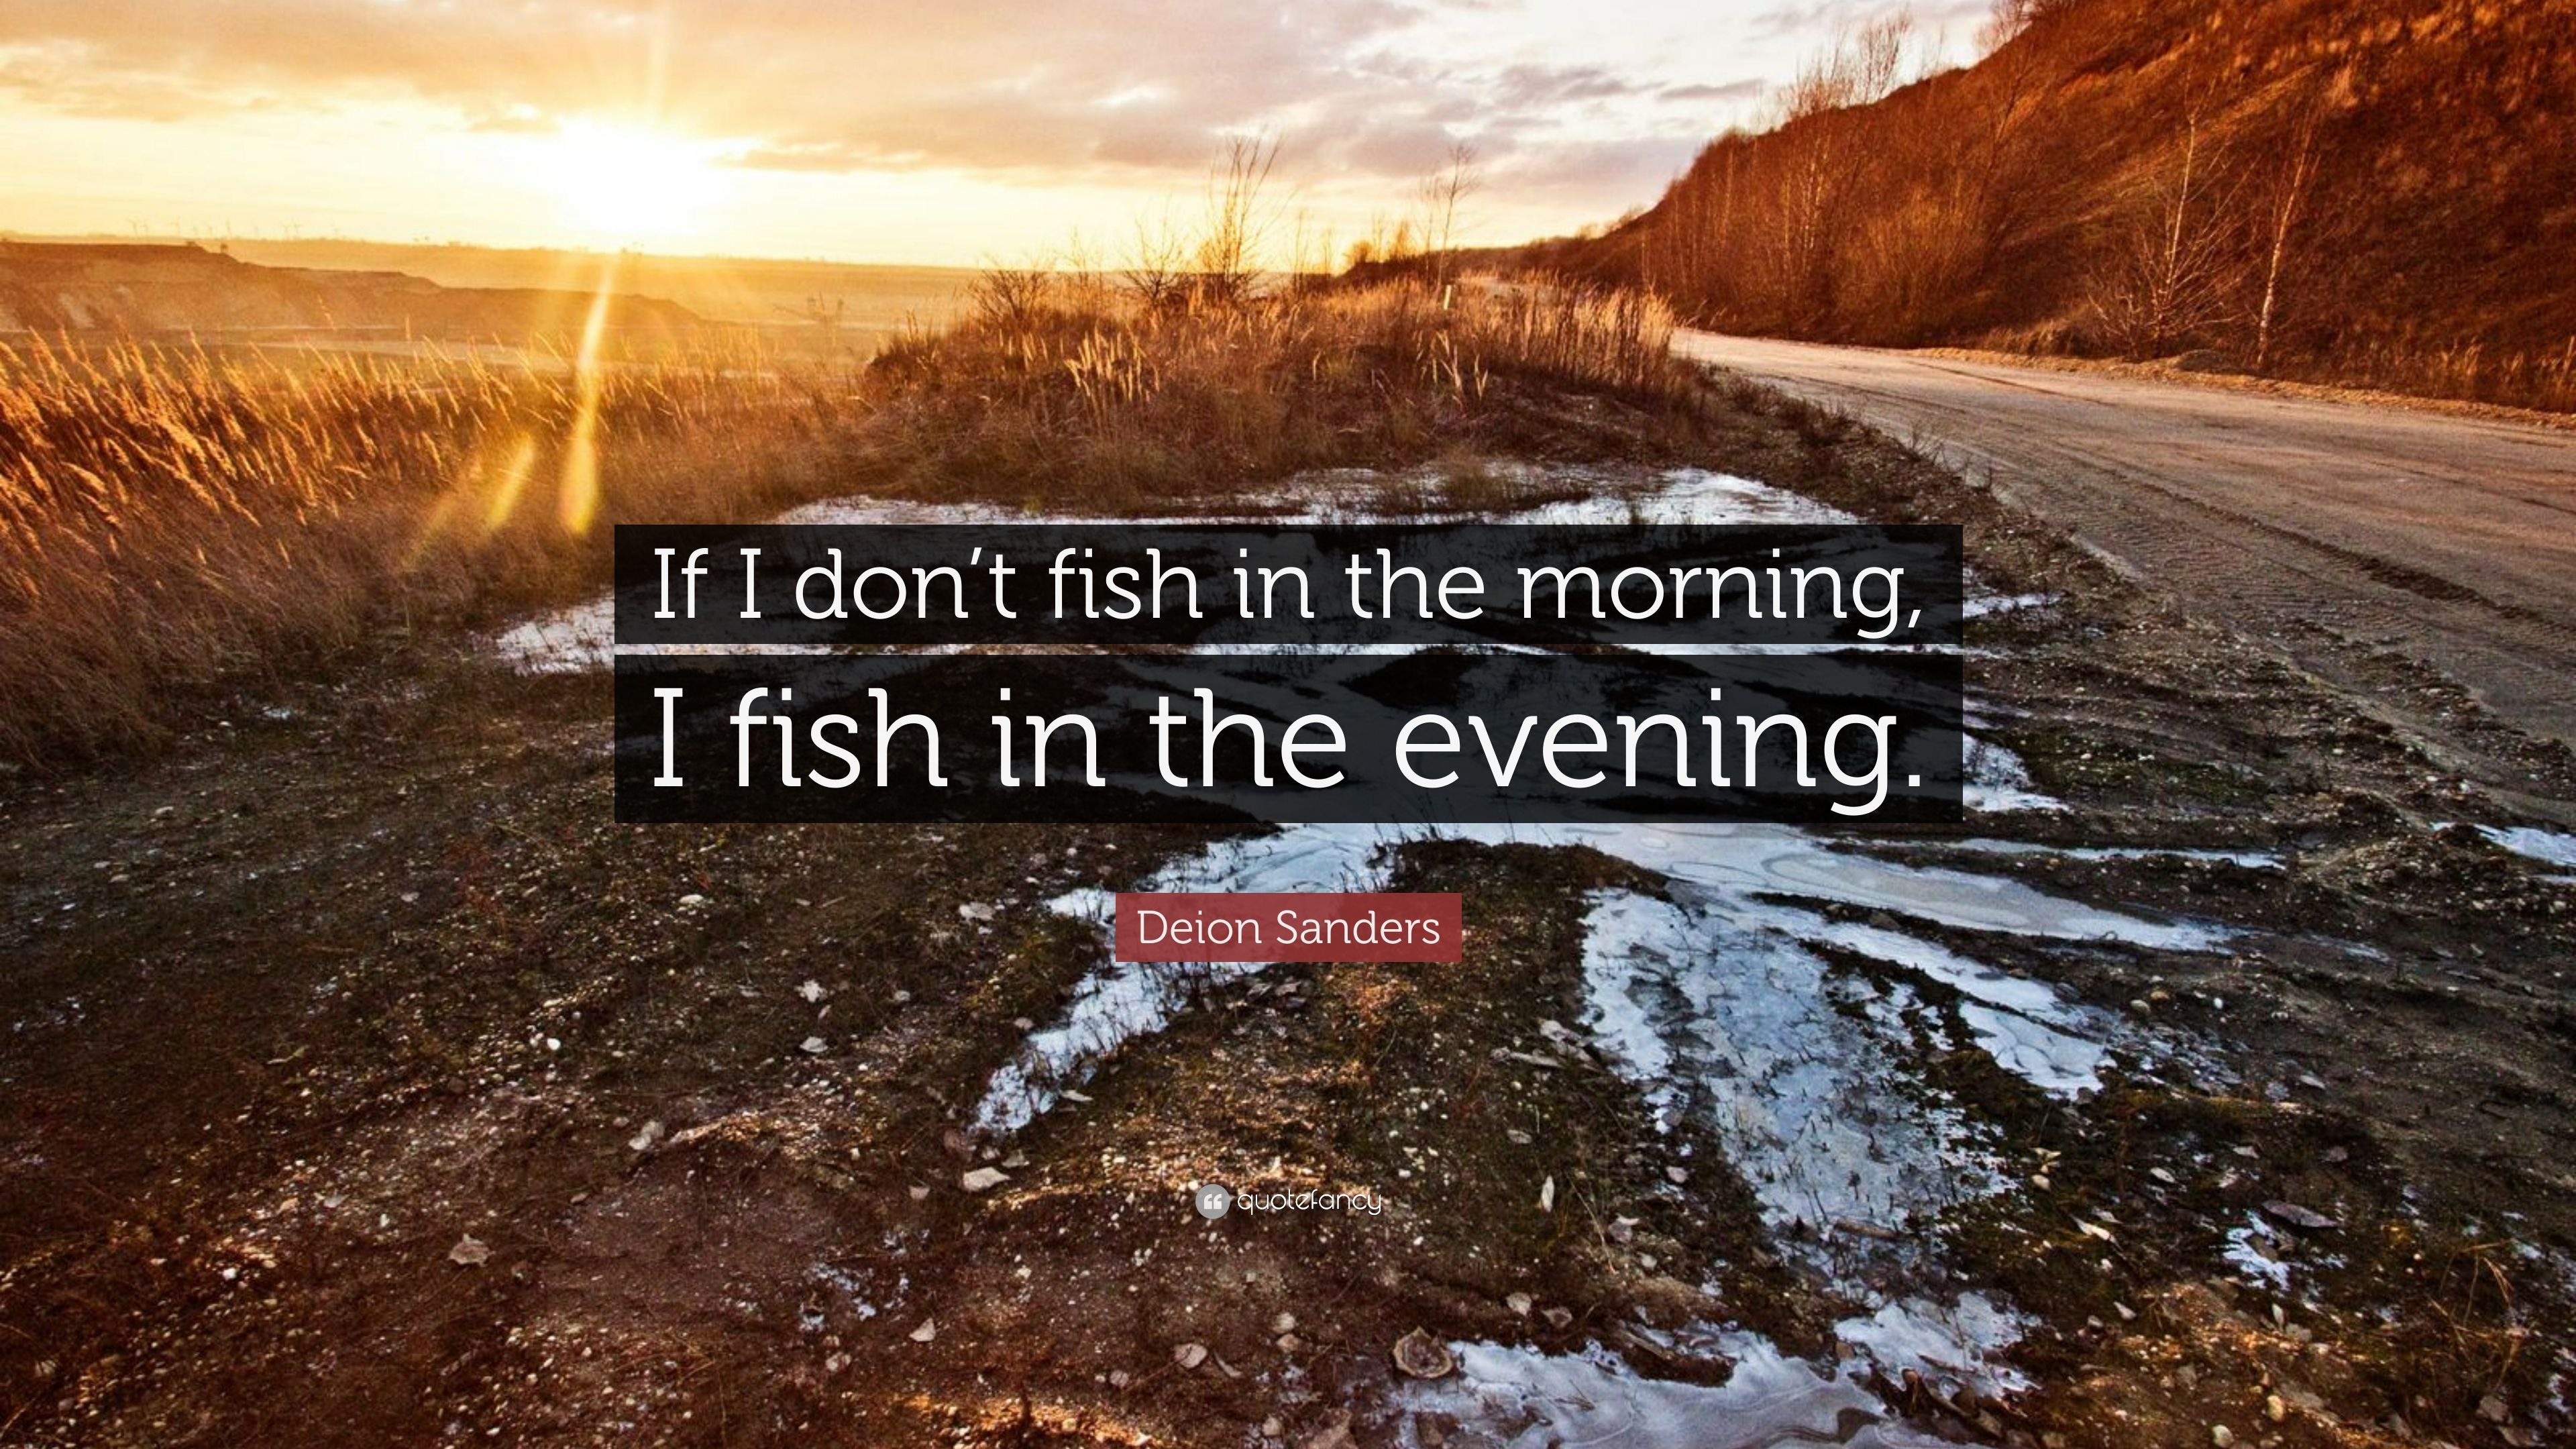 Deion Sanders Quote: “If I don't fish in the morning, I fish in